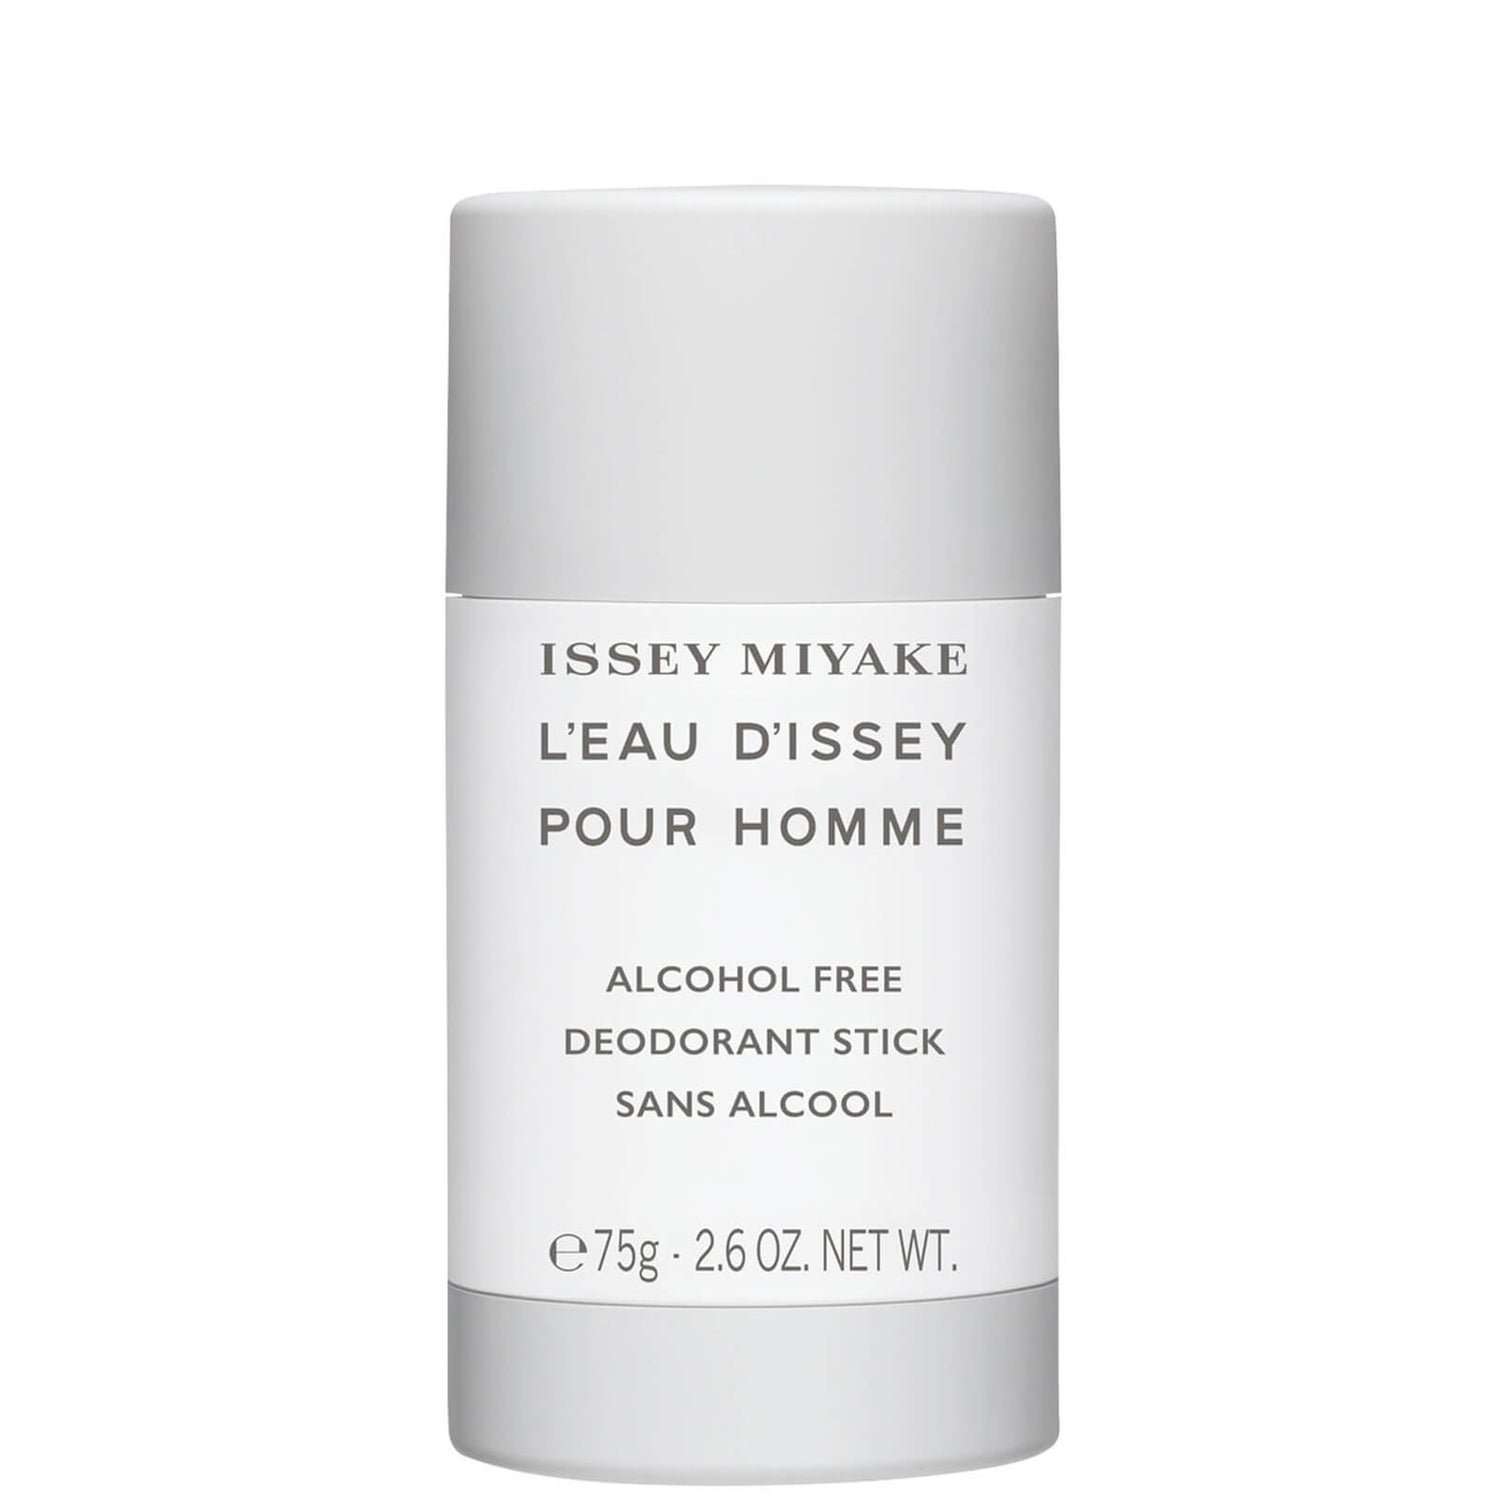 Issey Miyake L'Eau d'Issey Pour Homme Alcohol-Free Deodorant Stick 75g ...